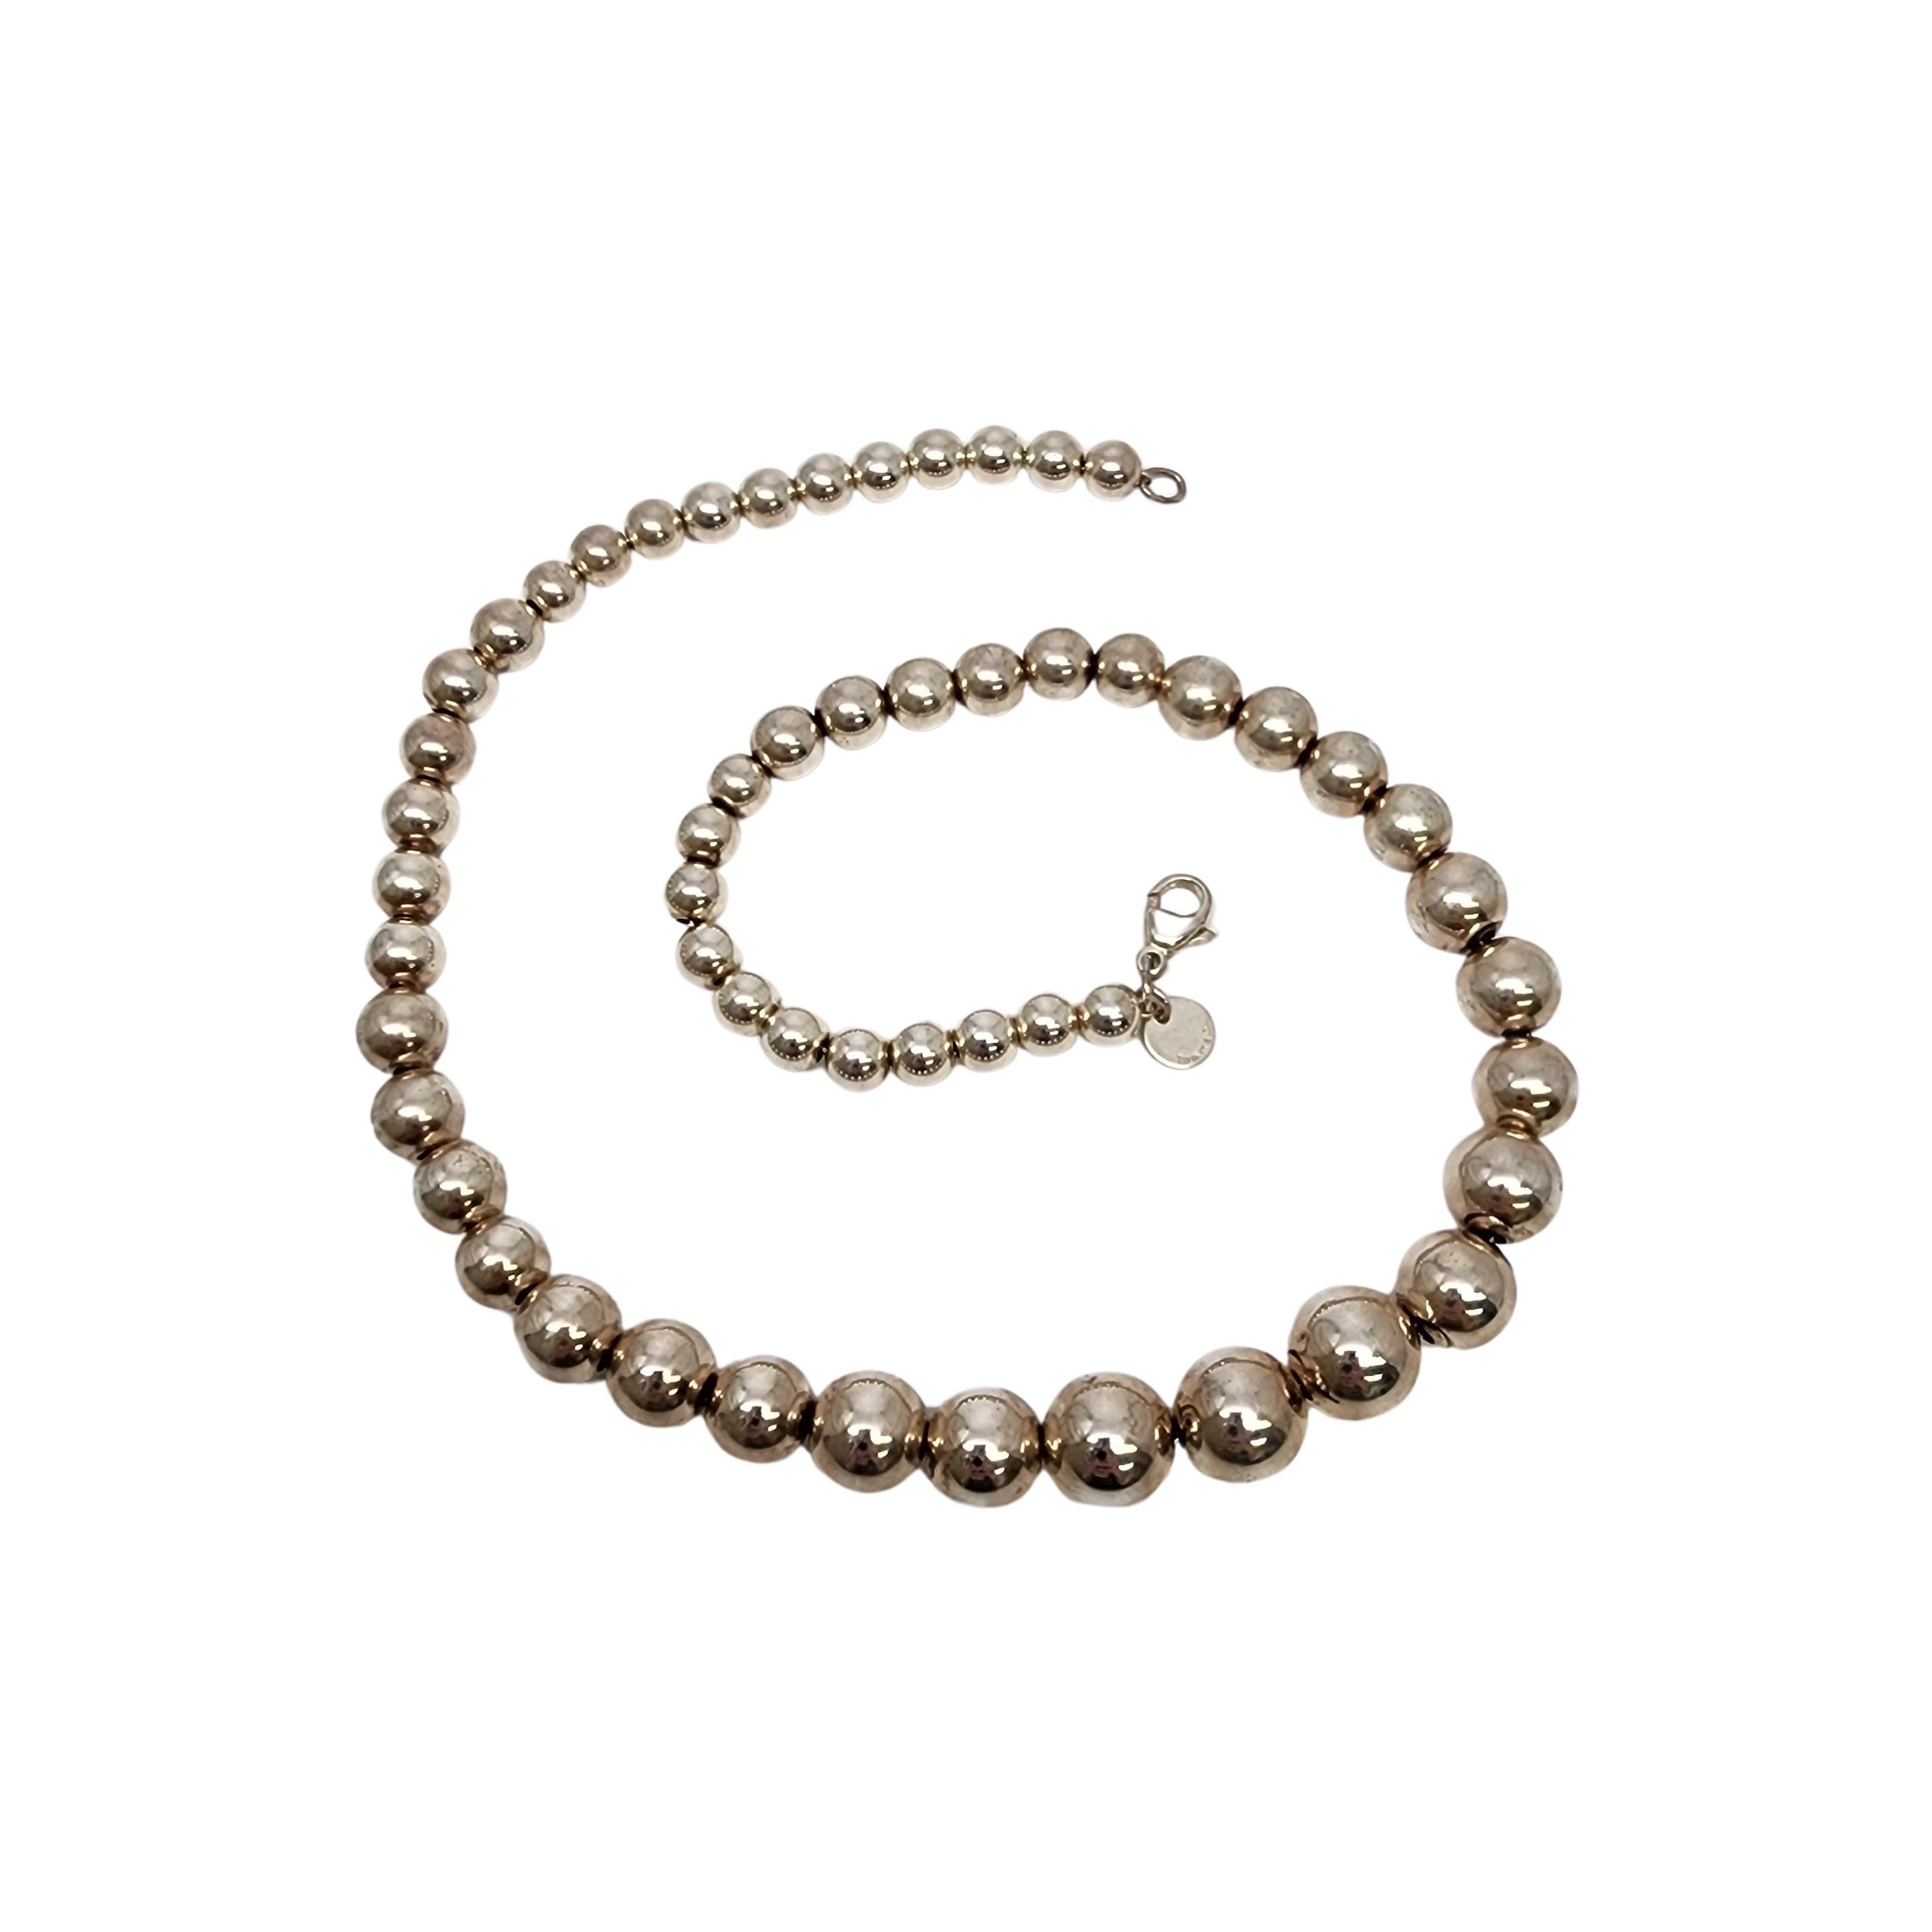 Sterling silver graduated ball bead necklace by Tiffany & Co.

Authentic Tiffany bracelet featuring sterling silver ball beads that are wider in the middle and get smaller towards the ends. Tiffany pouch and box are not included.

Measures approx